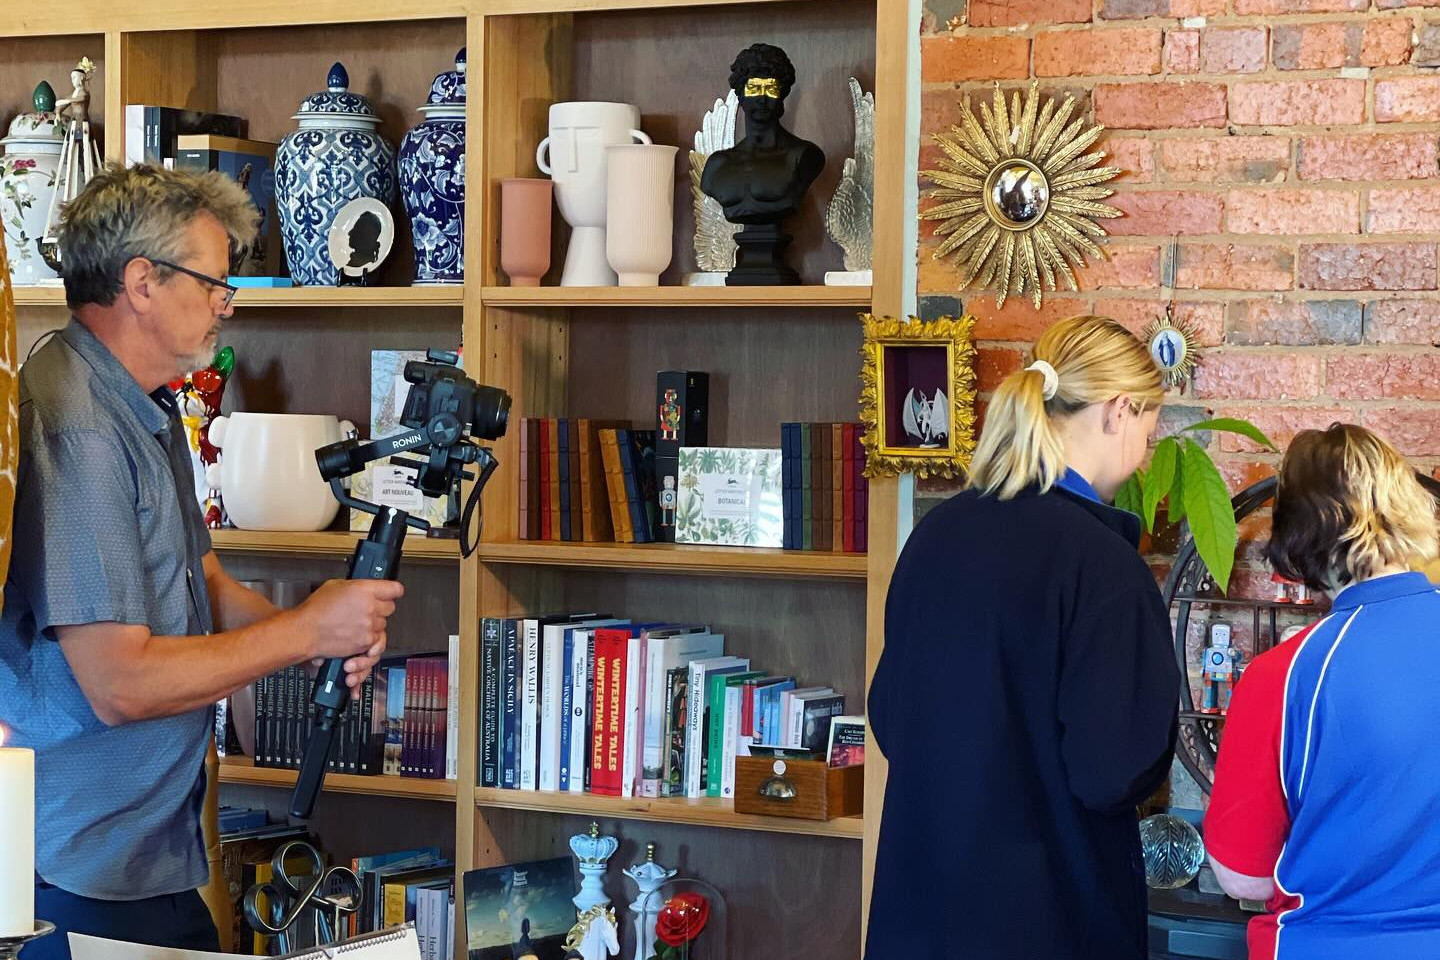 Mark Freeman filming at the Dimboola Imaginarium for the Victorian Government’s Experience Victoria 2033 promotional video. The campaign, which launched last year, is a 10-year strategic plan for a thriving visitor economy.